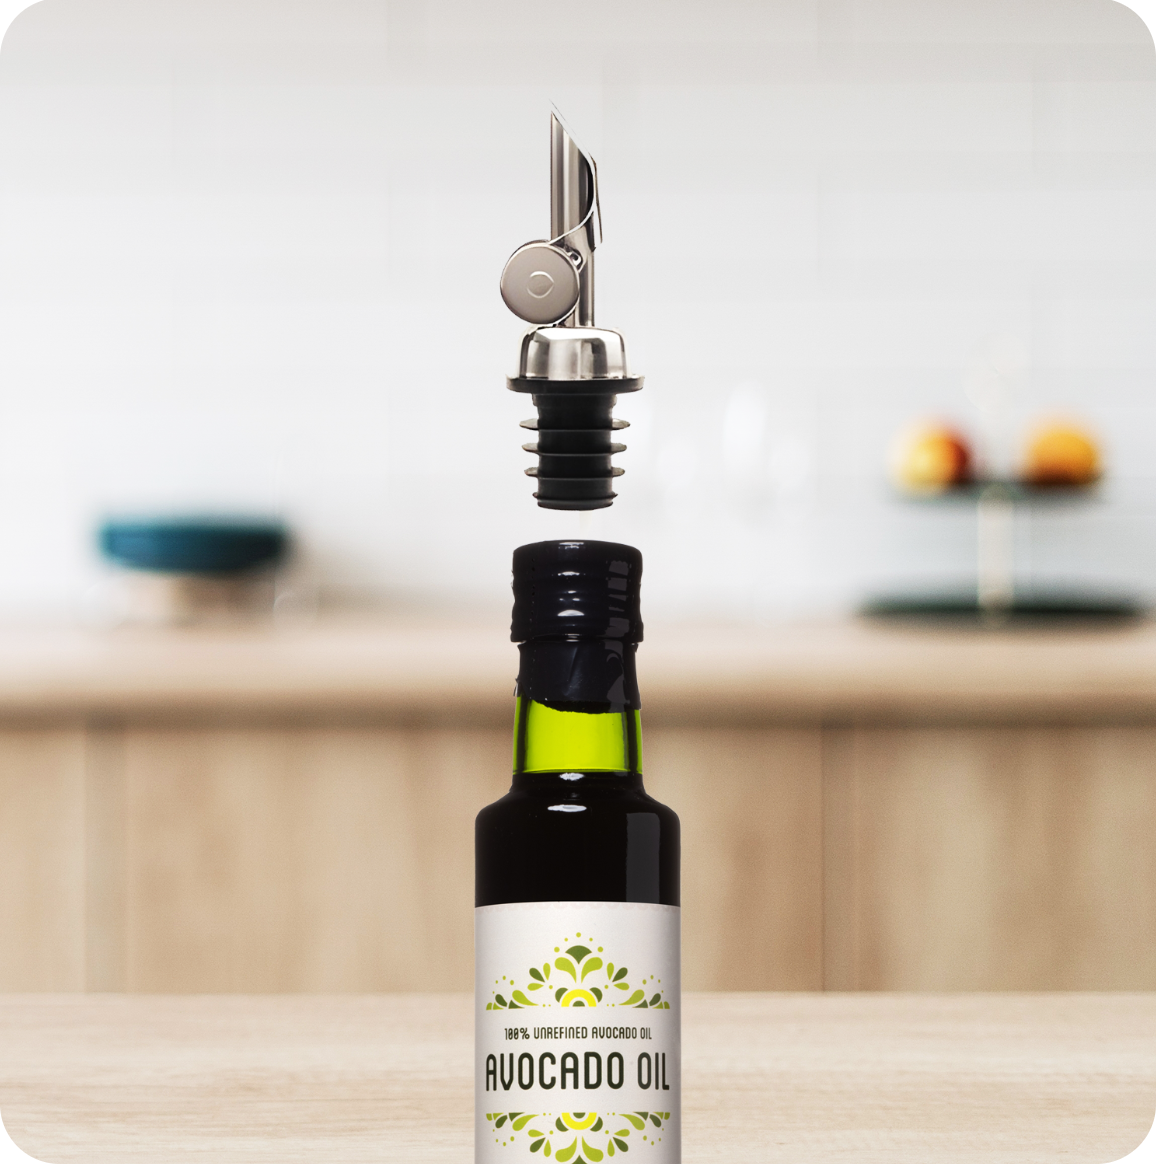 oil bottle present on a kitchen island and pourer spout hanging in the air